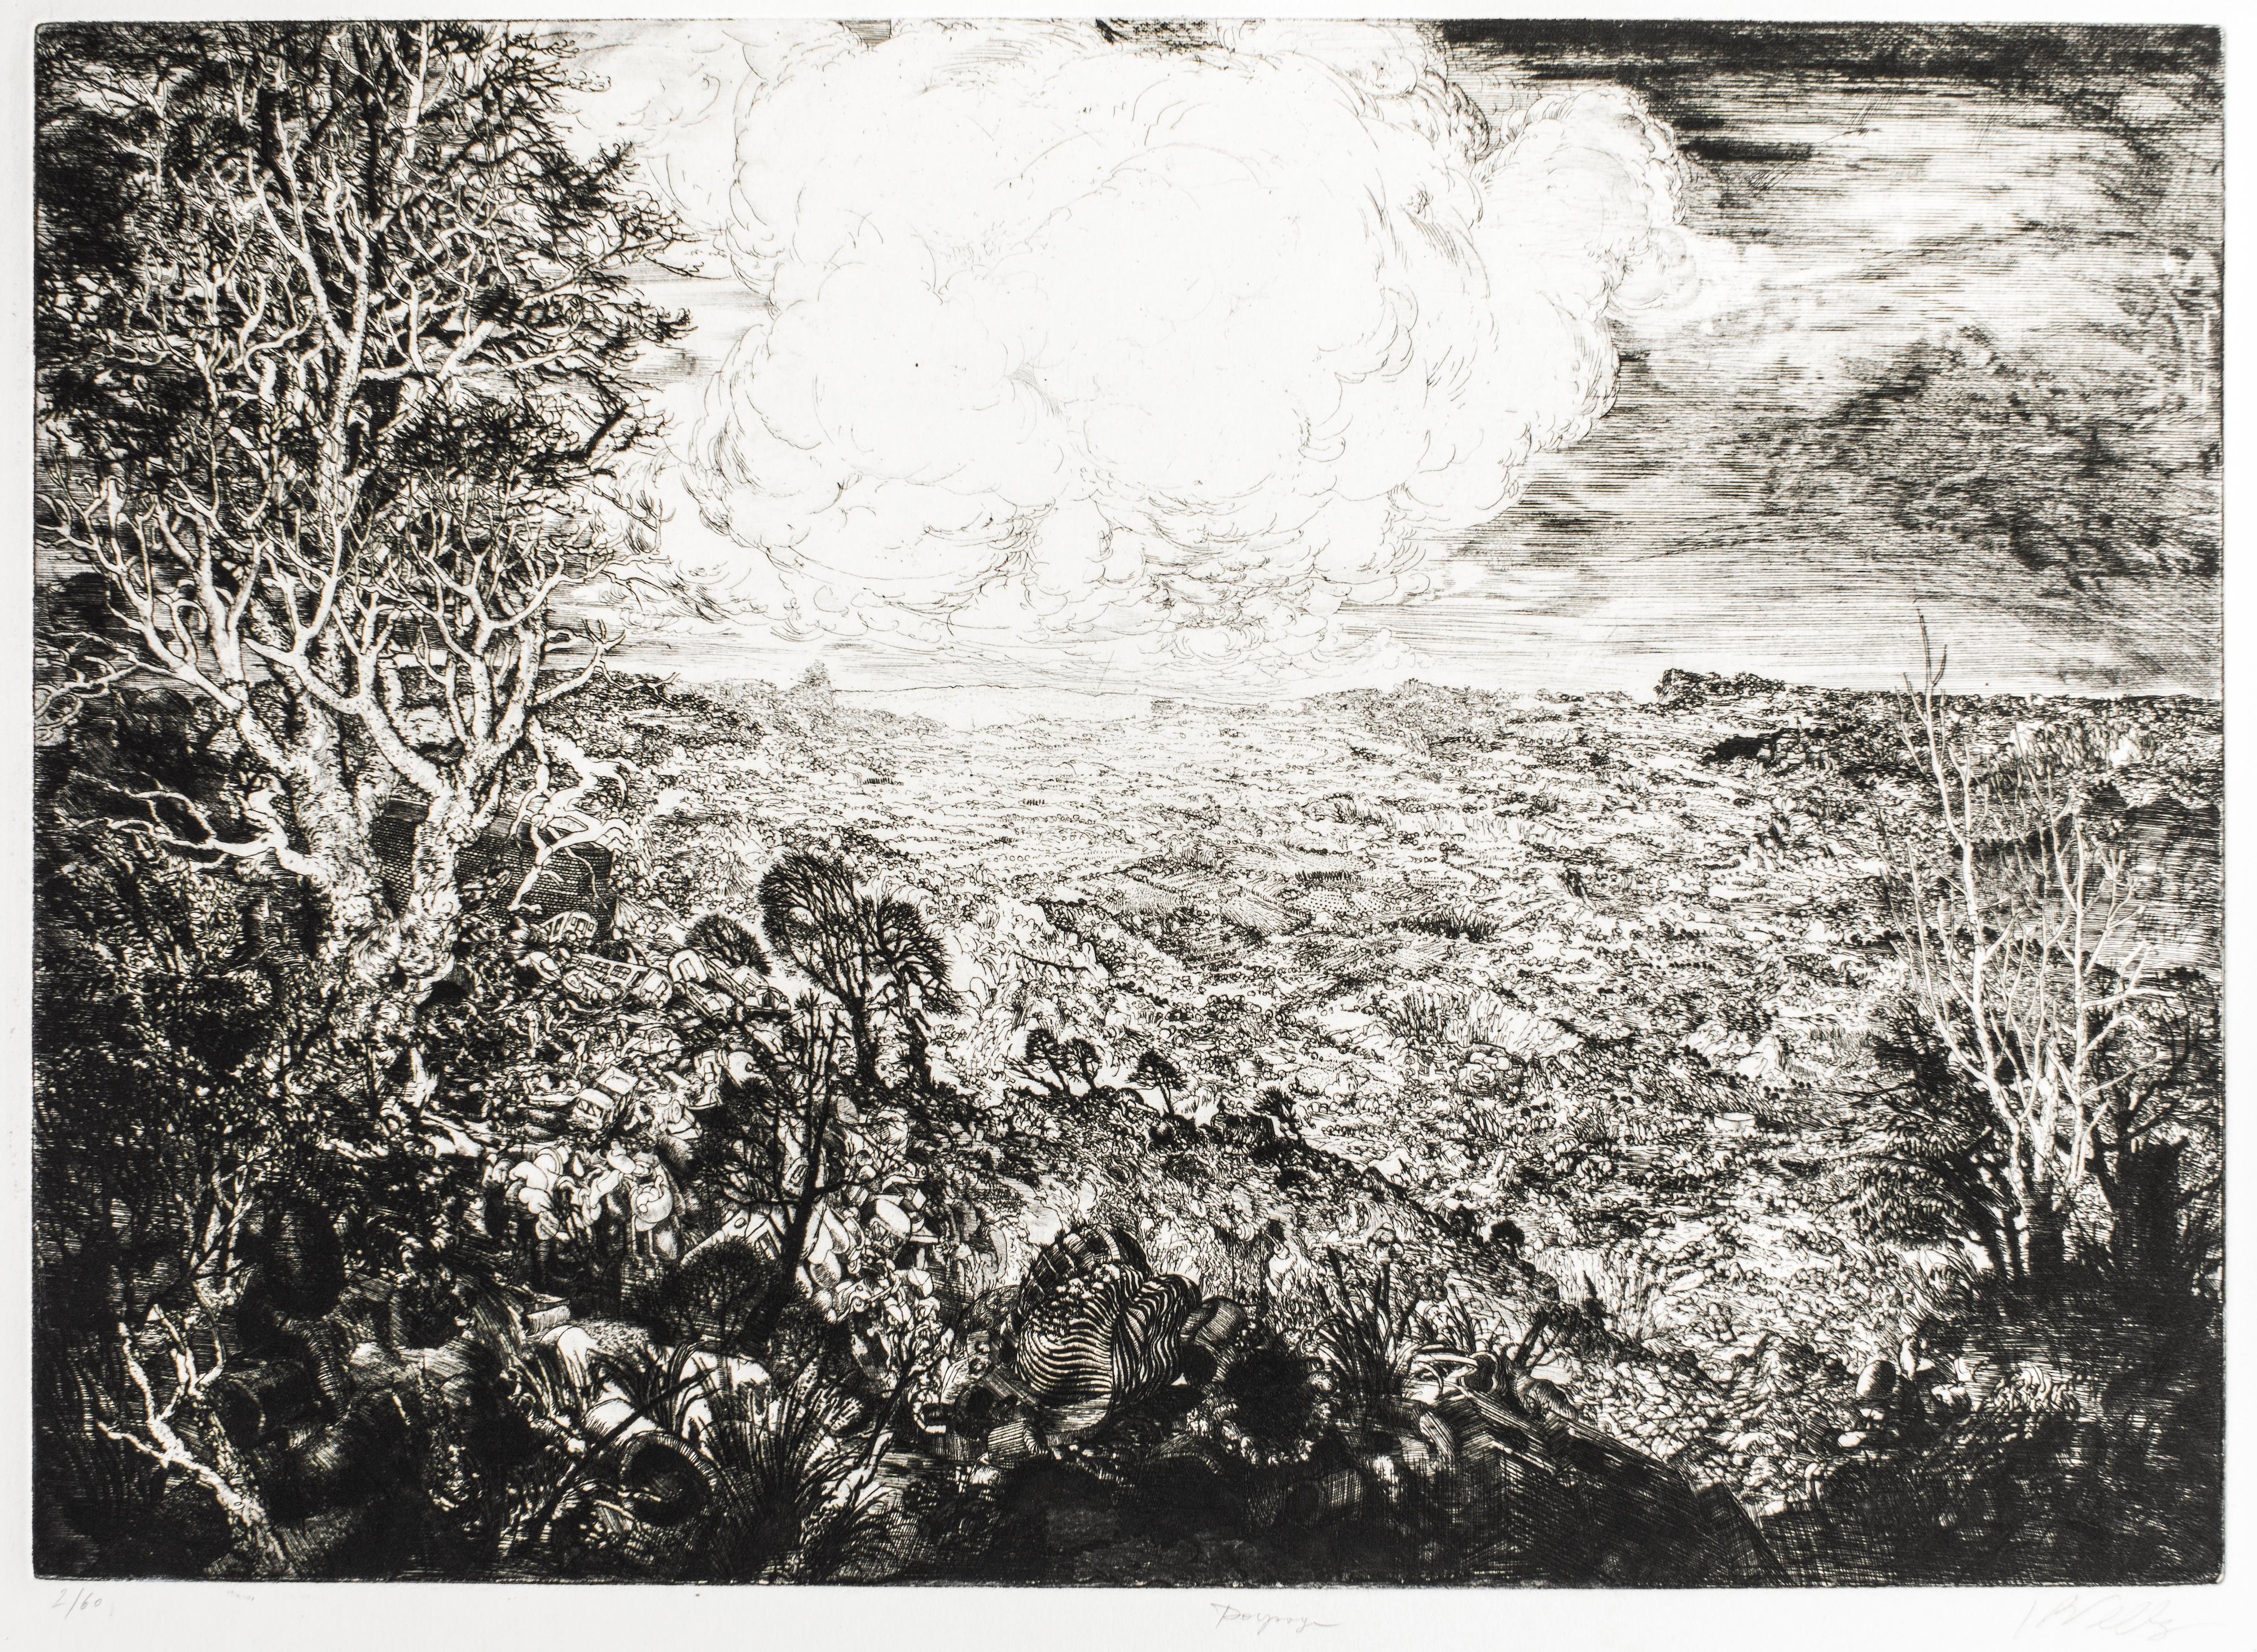 Landscape with Cars - Original Etching by J.P. Velly - 1969 - Print by Jean Pierre Velly